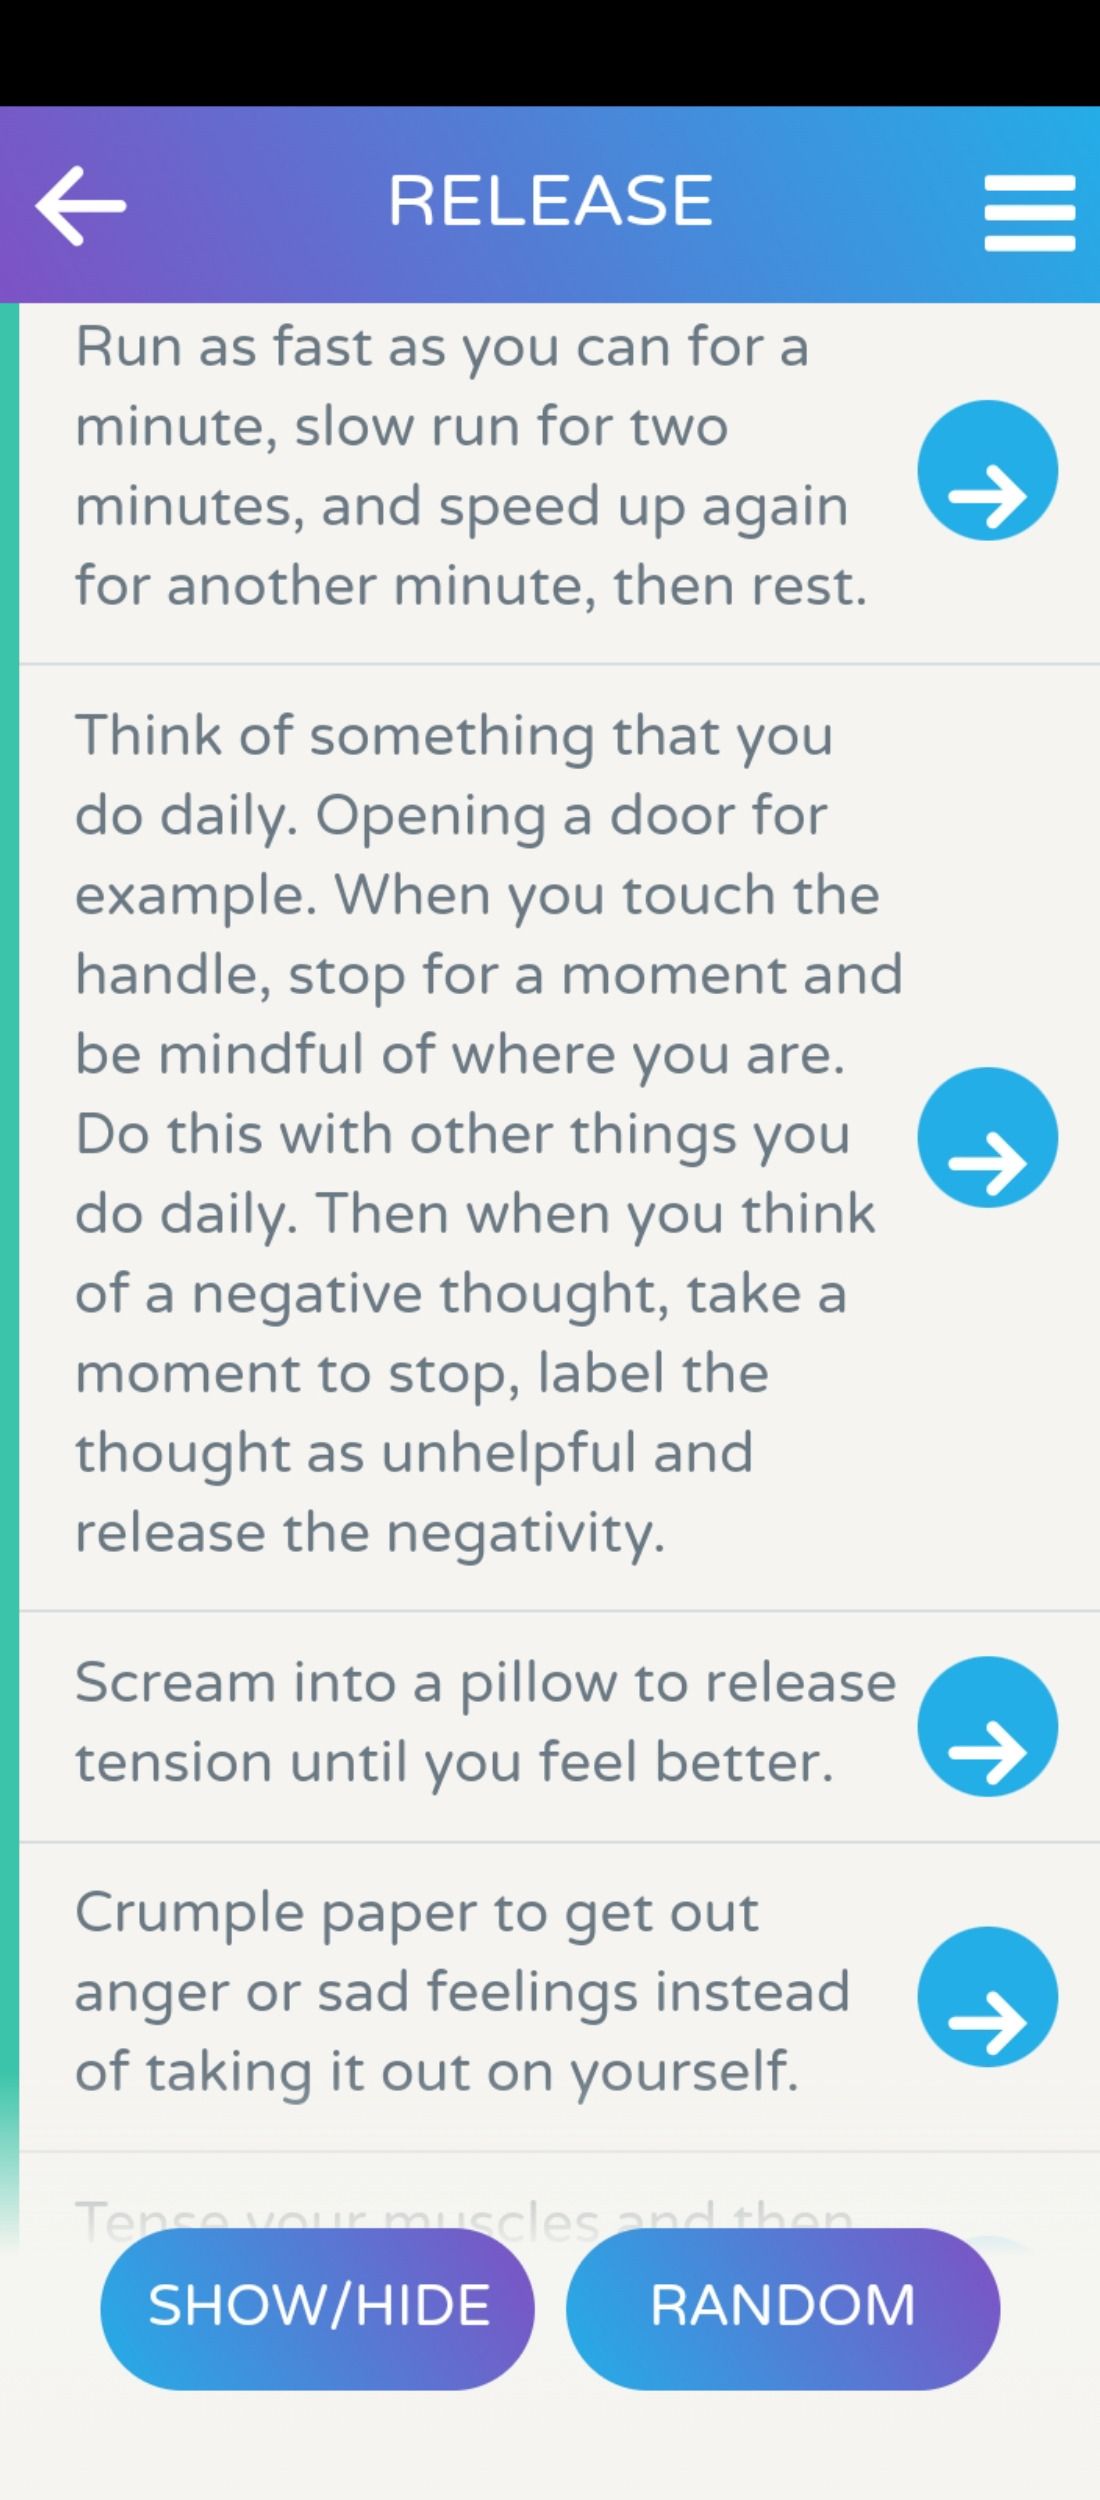 Psycho-anxiety education in the Calm Harm app